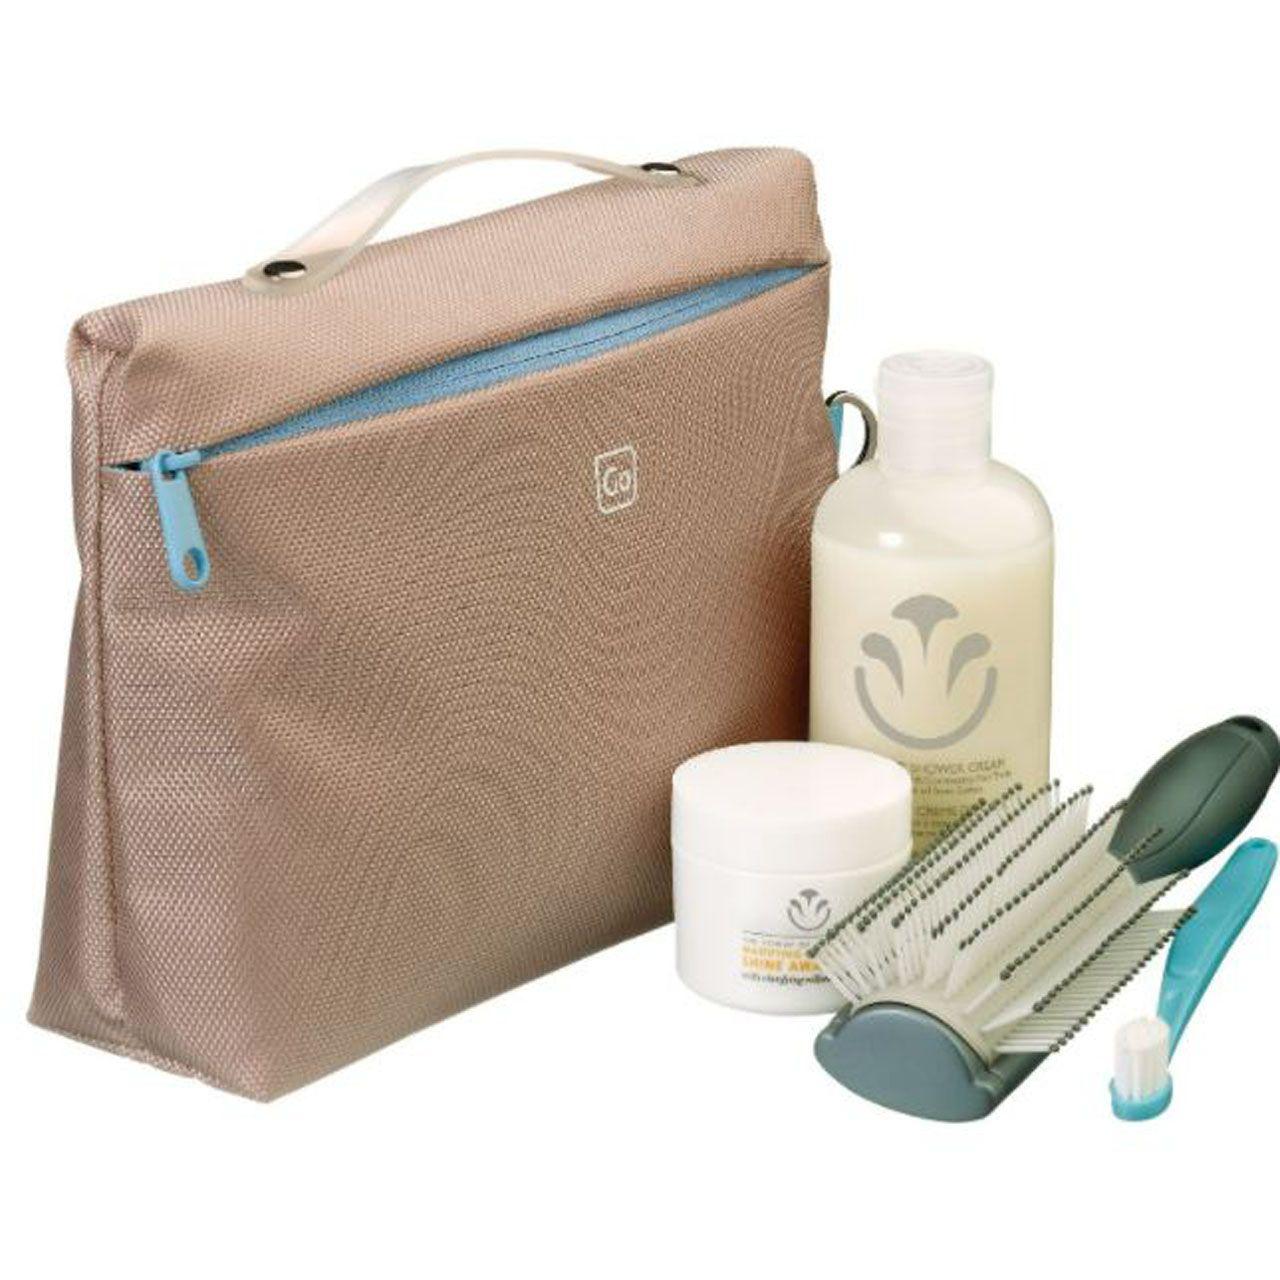 Washable Washbag for Weekends Away